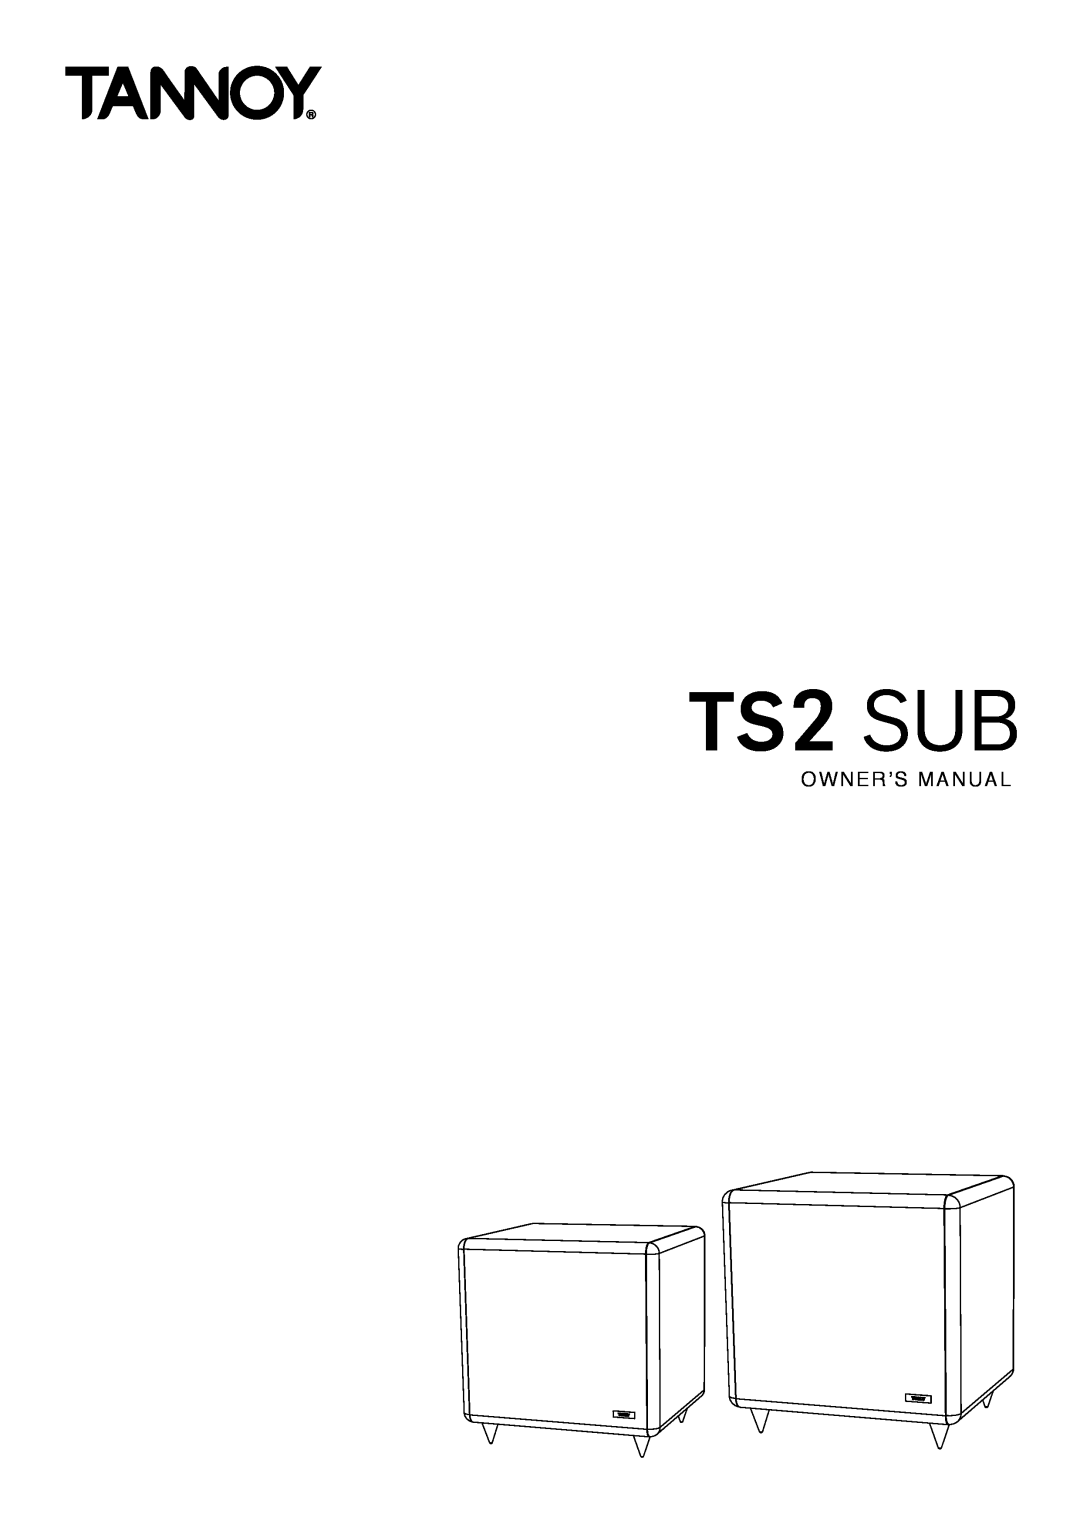 Tannoy owner manual TS2 SUB 